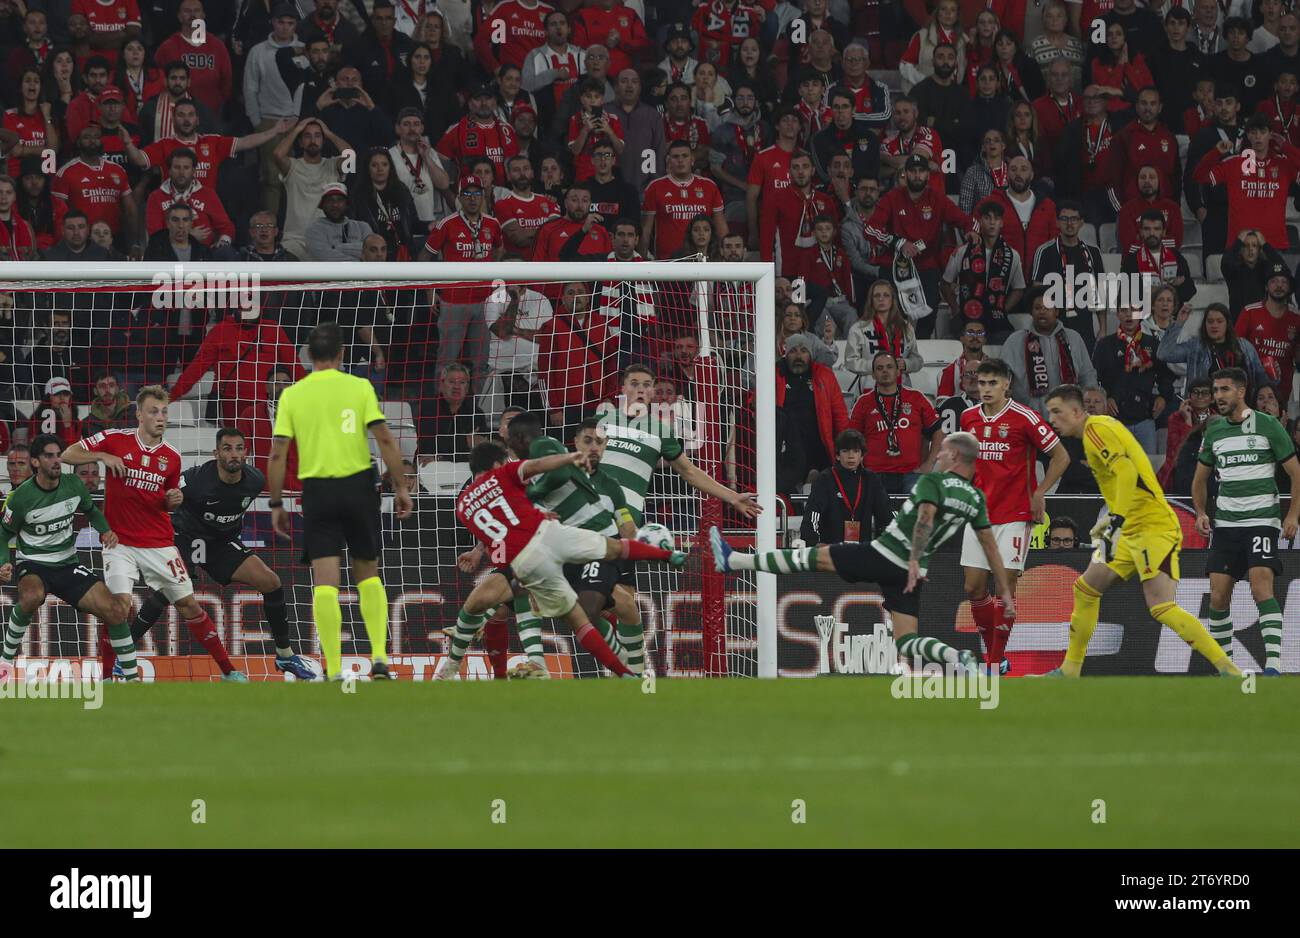 Lisbon, 11/12/2023 - Sport Lisboa e Benfica hosted Sporting Clube de Portugal this evening at the Estádio da Luz in Lisbon, in a game counting for the eleventh round of the Primeira Liga 2023/24. João Neves scores 1-1 (Pedro Rocha / Global Imagens) Credit: Susana Jorge/Alamy Live News Stock Photo